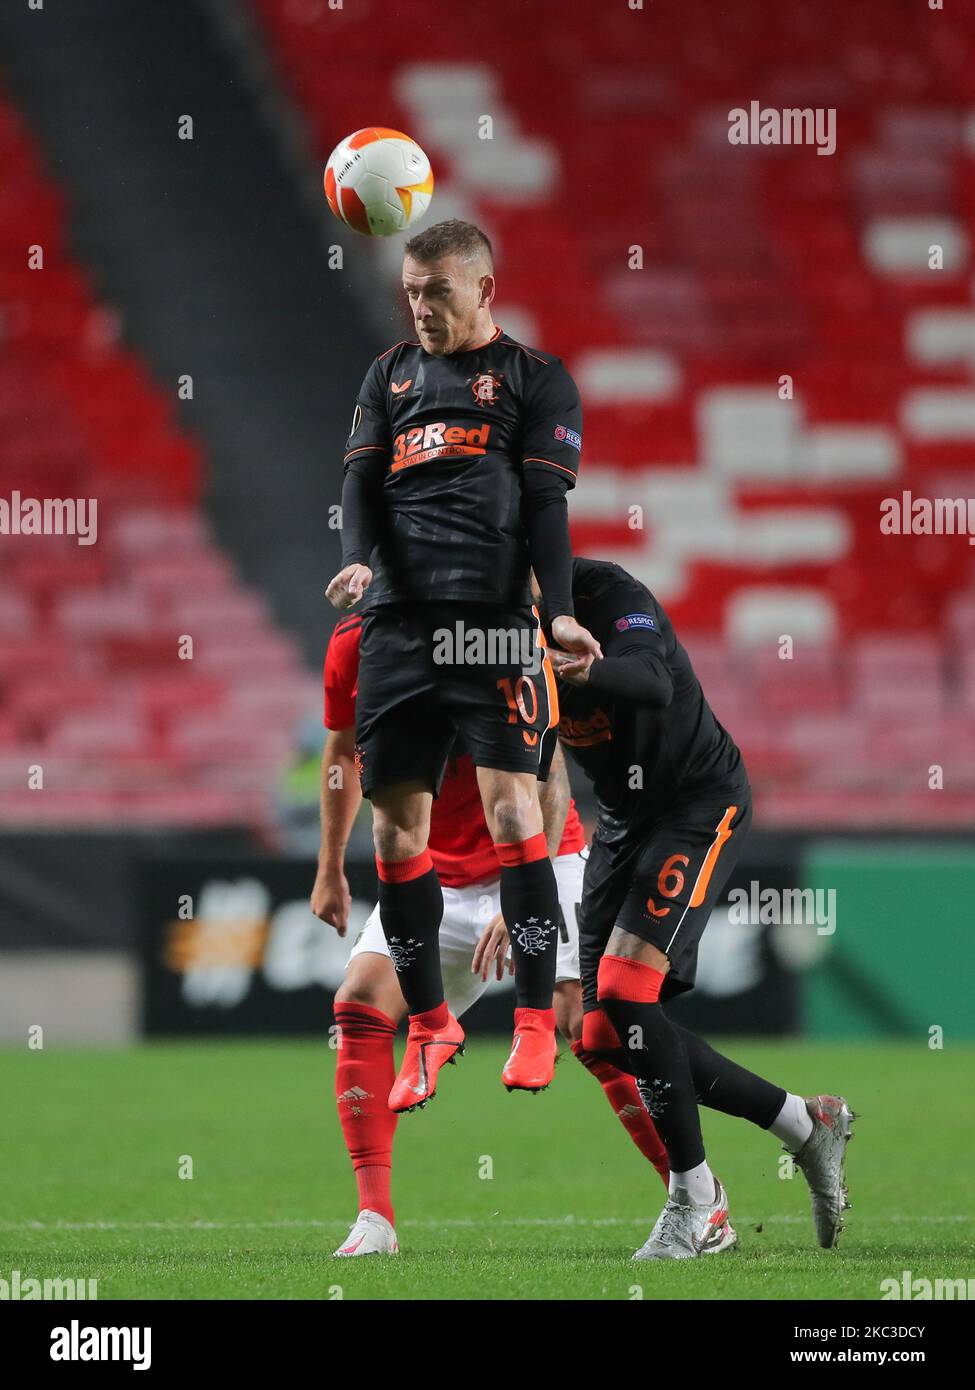 Steven Davis of Rangers FC in action during the UEFA Europa League Group D stage match between SL Benfica and Rangers FC at Estadio da Luz on November 5, 2020 in Lisbon, Portugal. (Photo by Paulo Nascimento/NurPhoto) Stock Photo